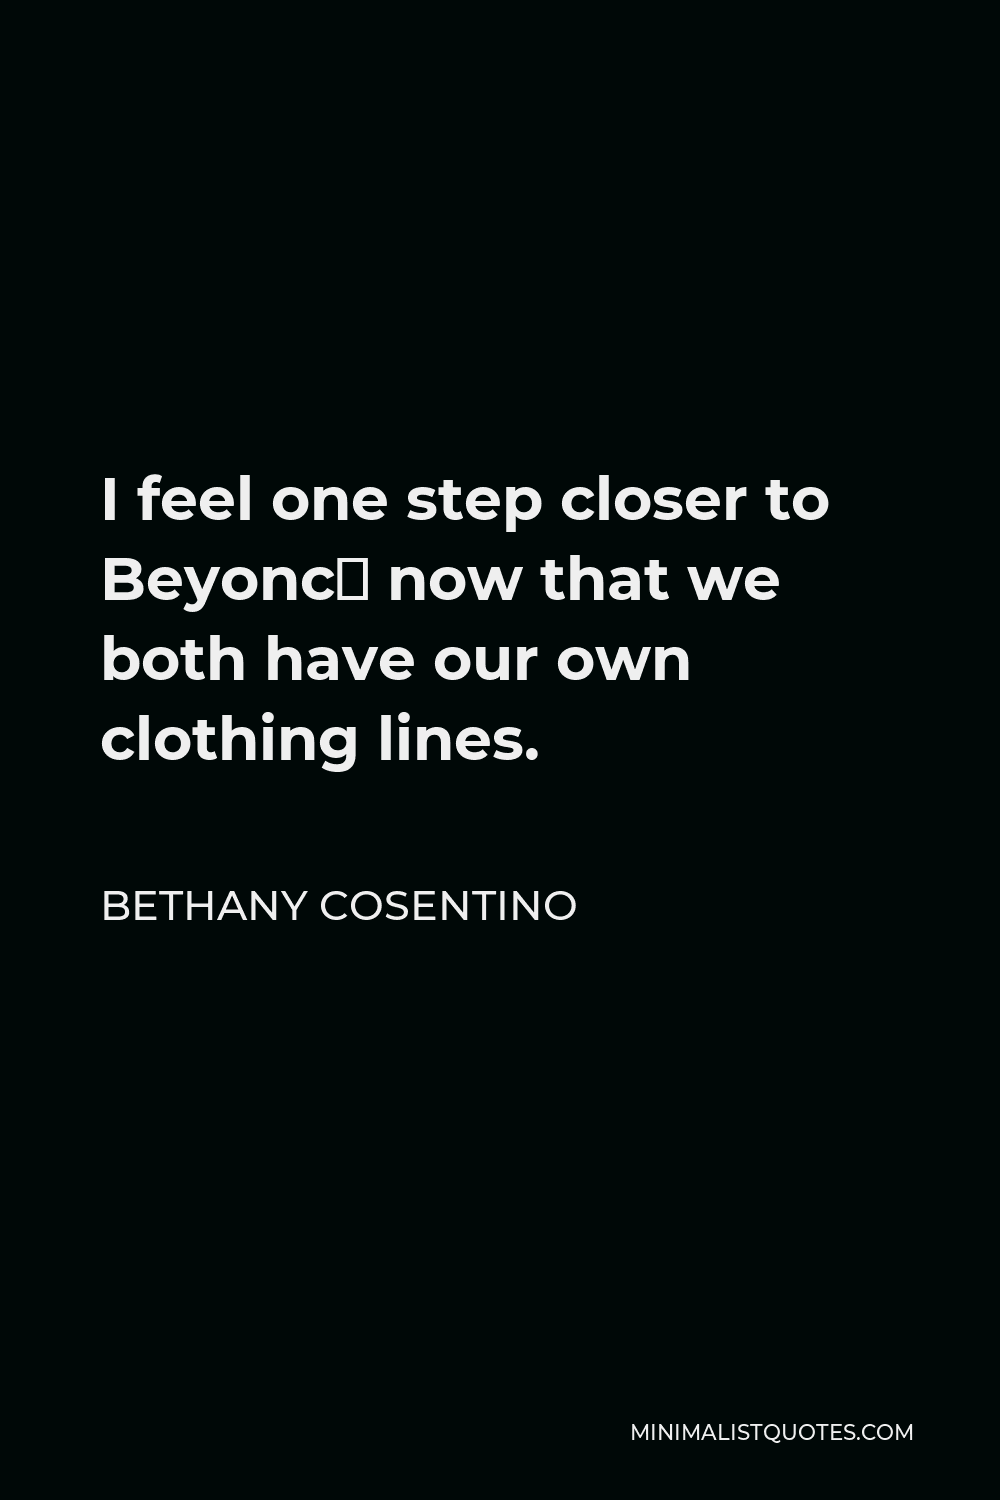 Bethany Cosentino Quote - I feel one step closer to Beyoncé now that we both have our own clothing lines.